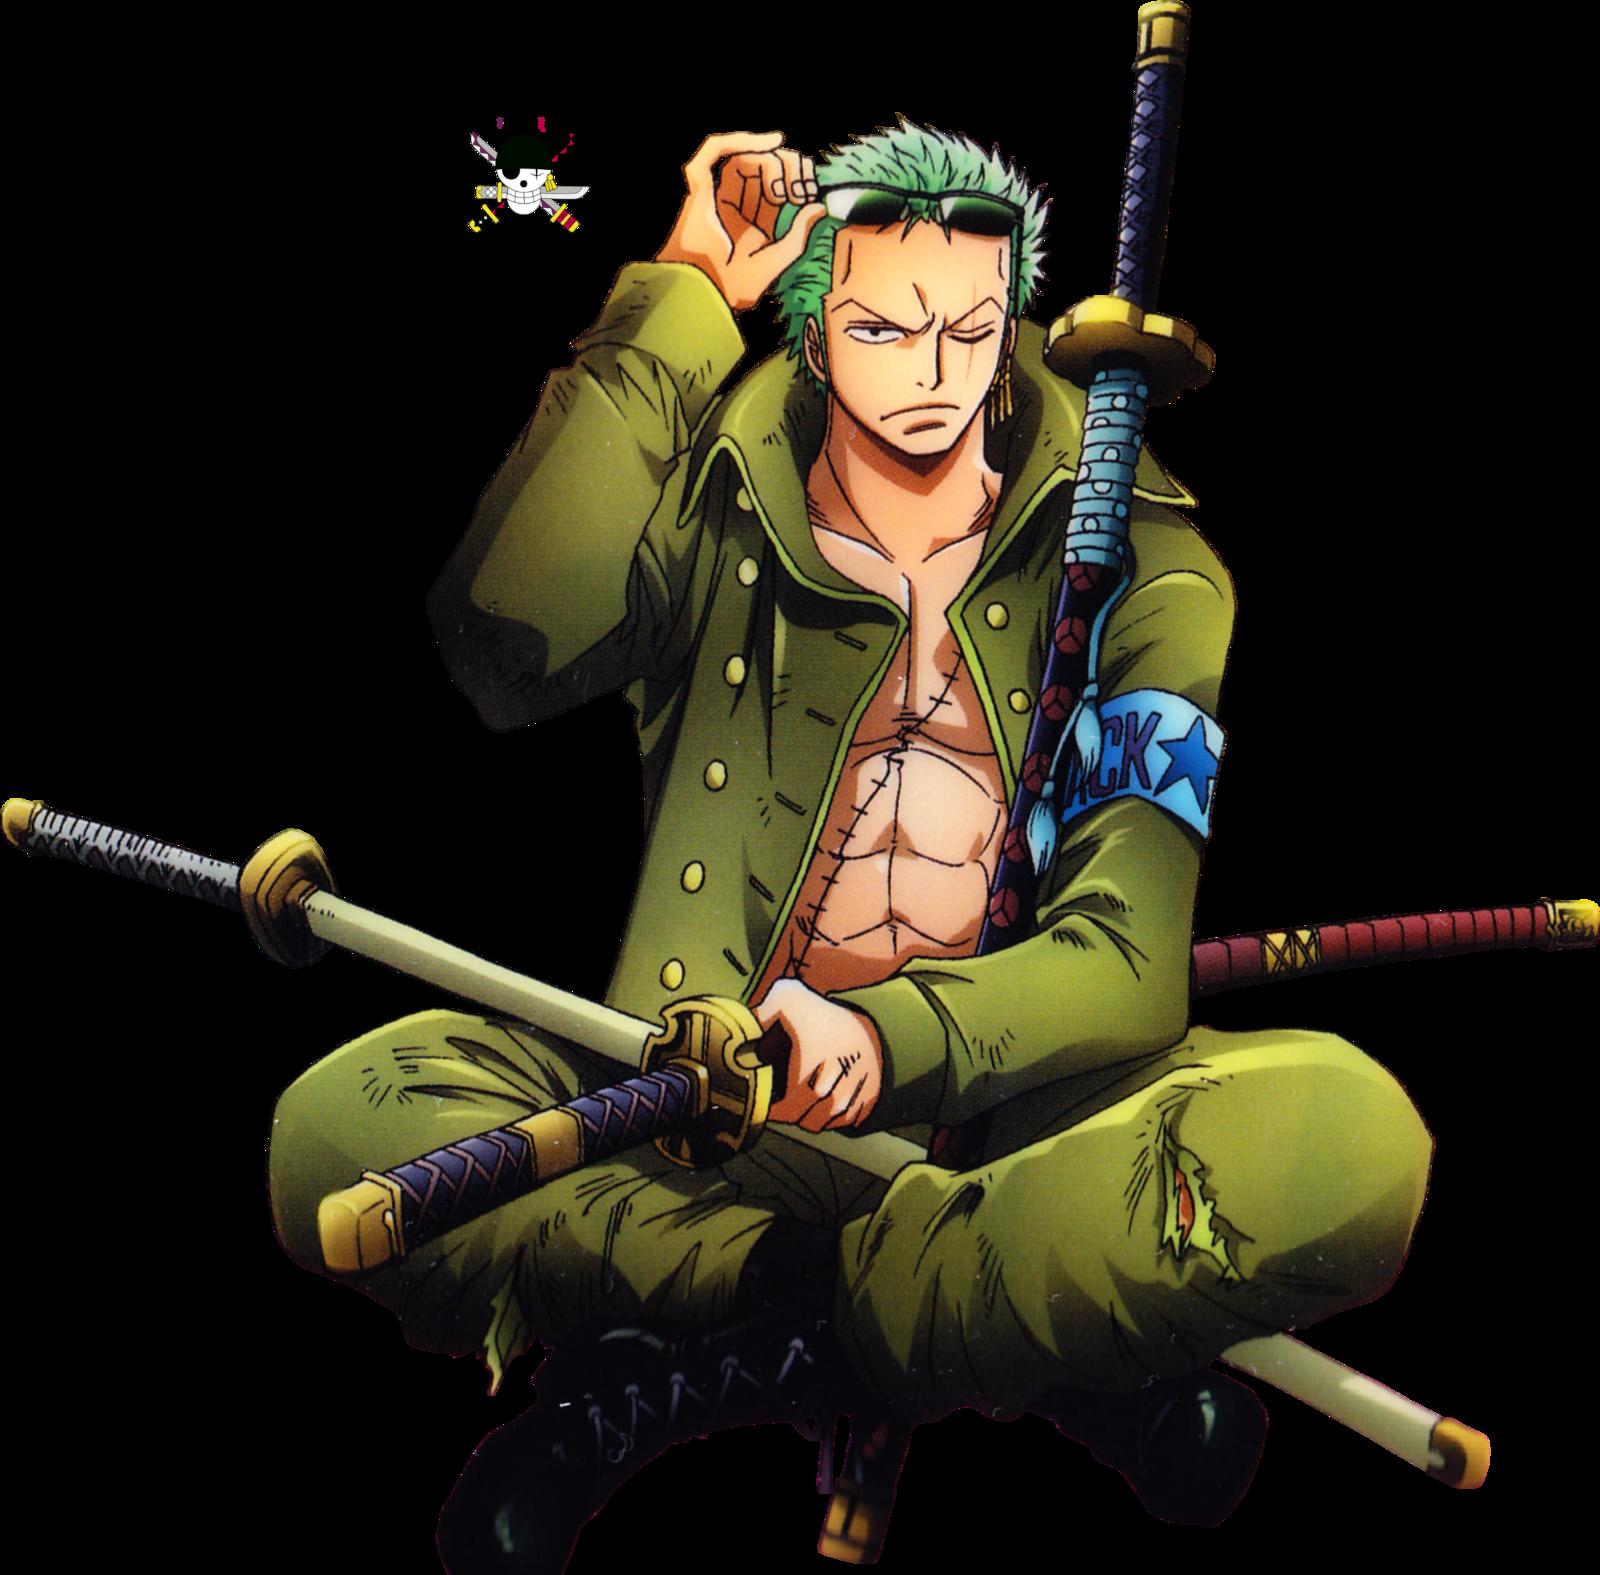 Zoro PNG Images, Free Transparent Zoro Download - KindPNG